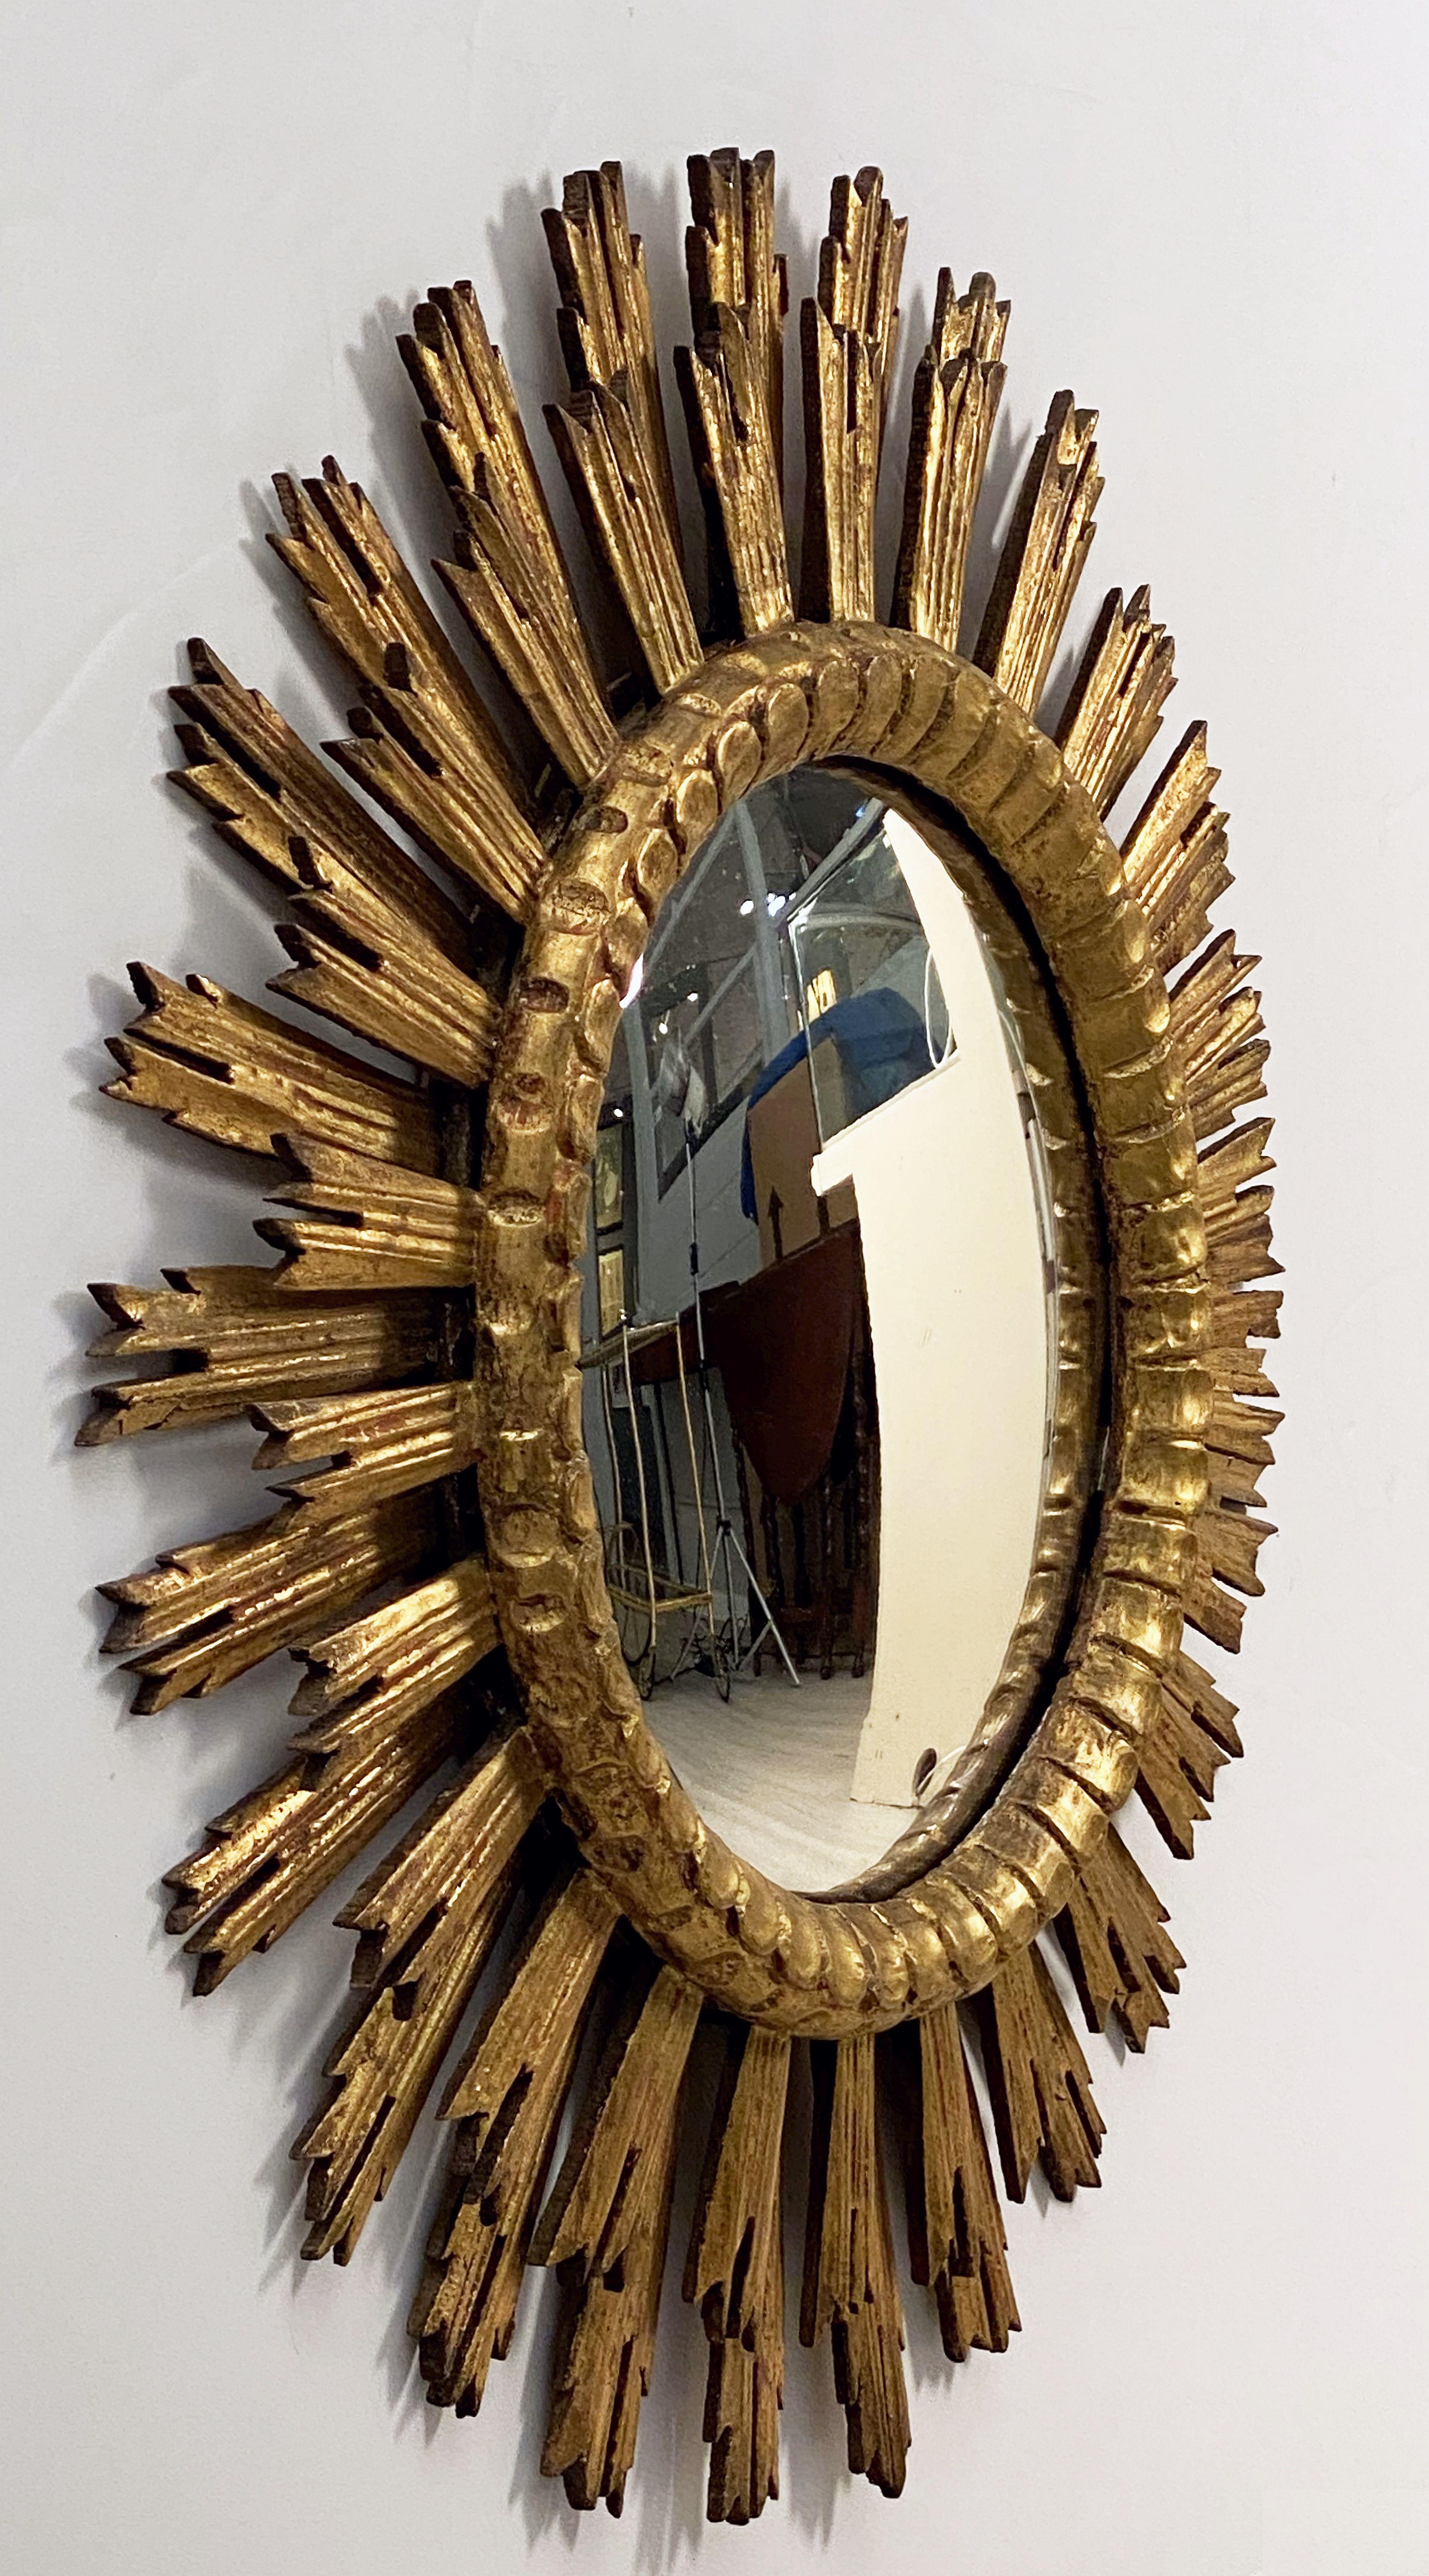 A lovely French gilt sunburst (or starburst) mirror, 30 inches diameter, with a round, convex mirrored glass centre in moulded frame.